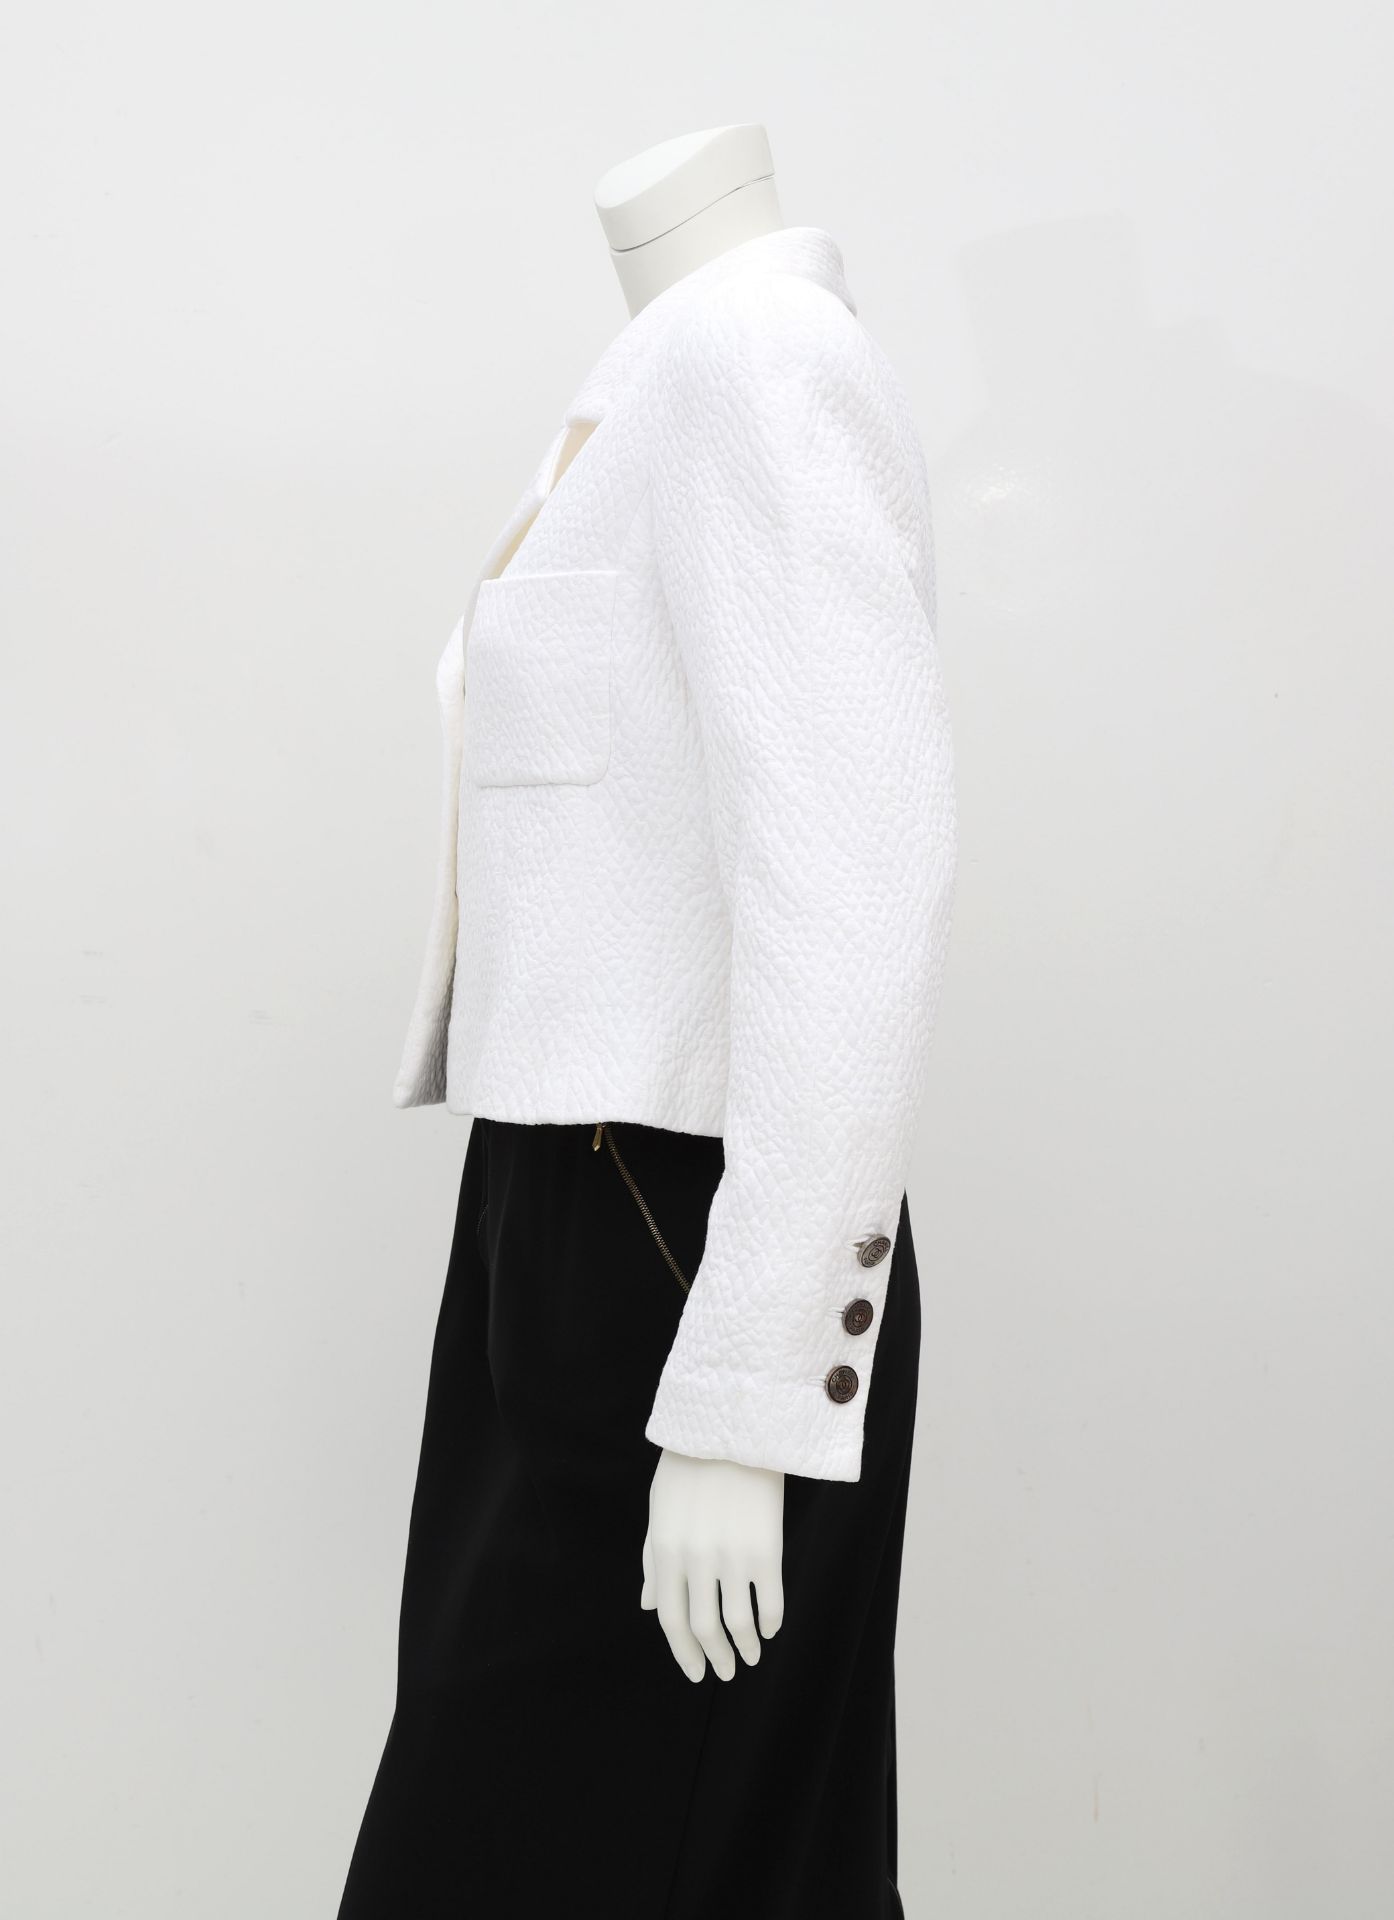 Chanel Boutique white jacket with a quilted pattern. The jacket has two external pockets, a - Image 3 of 6